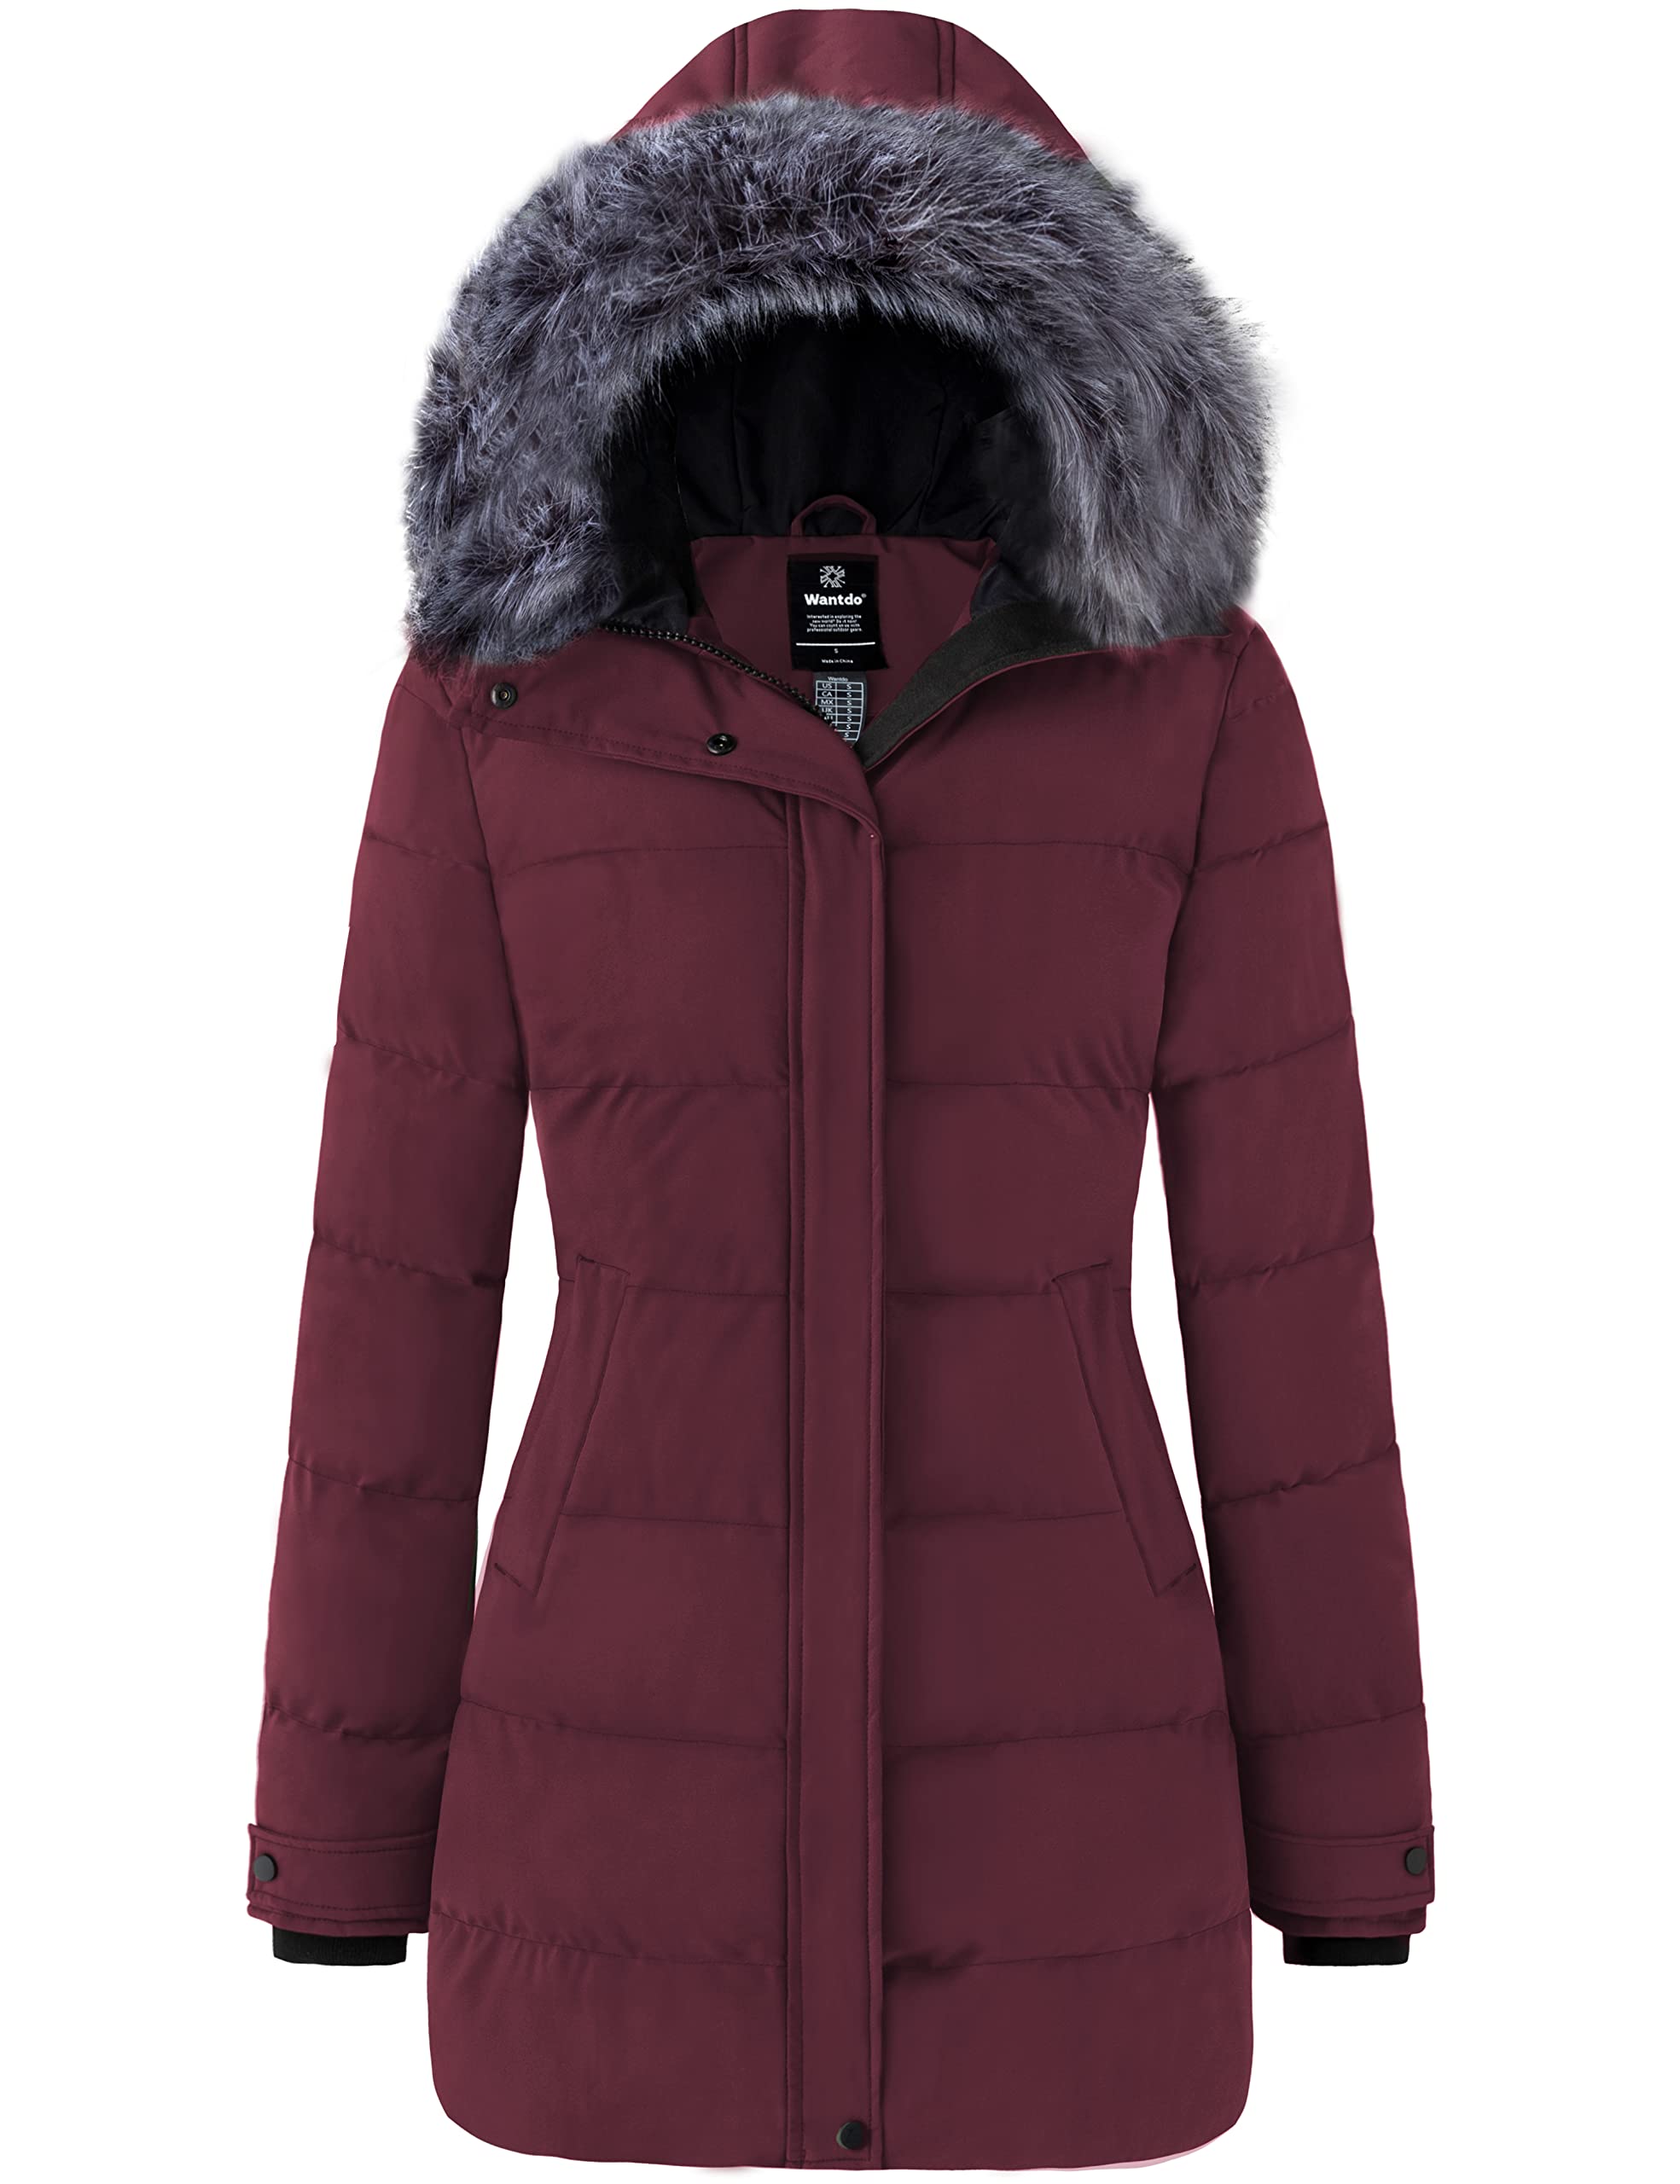 Wantdo Women's Long Quilted Winter Coat Thicken Puffer Jacket with Faux Fur Hood